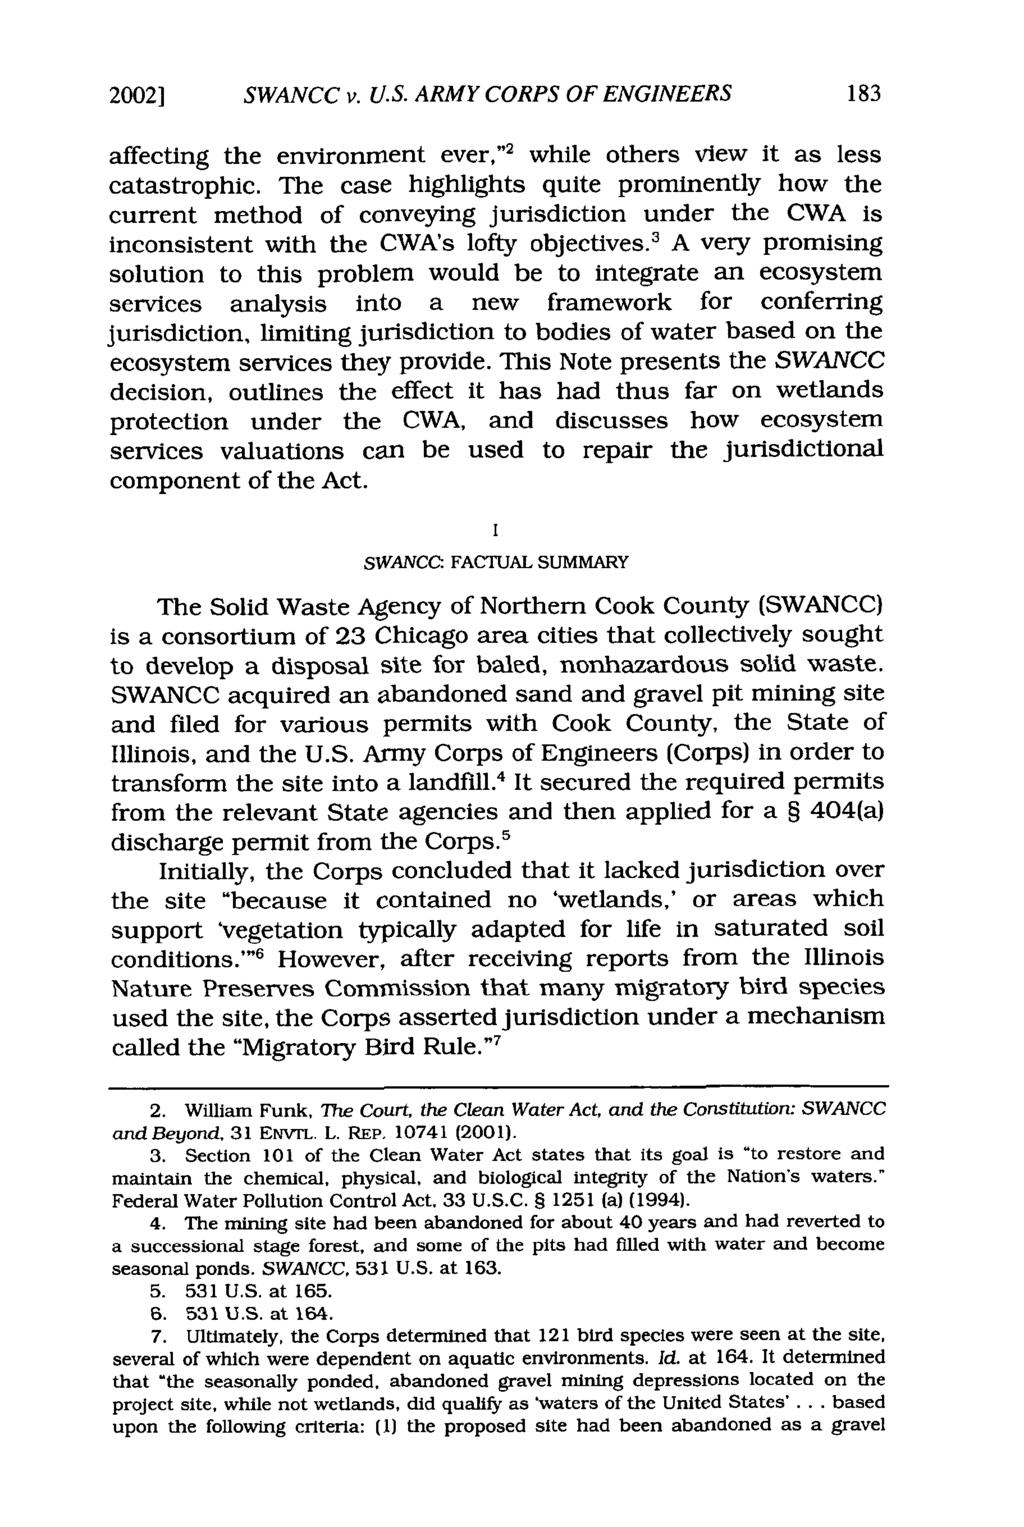 20021 SWANCC v. U.S. ARMY CORPS OF ENGINEERS affecting the environment ever," 2 while others view it as less catastrophic.